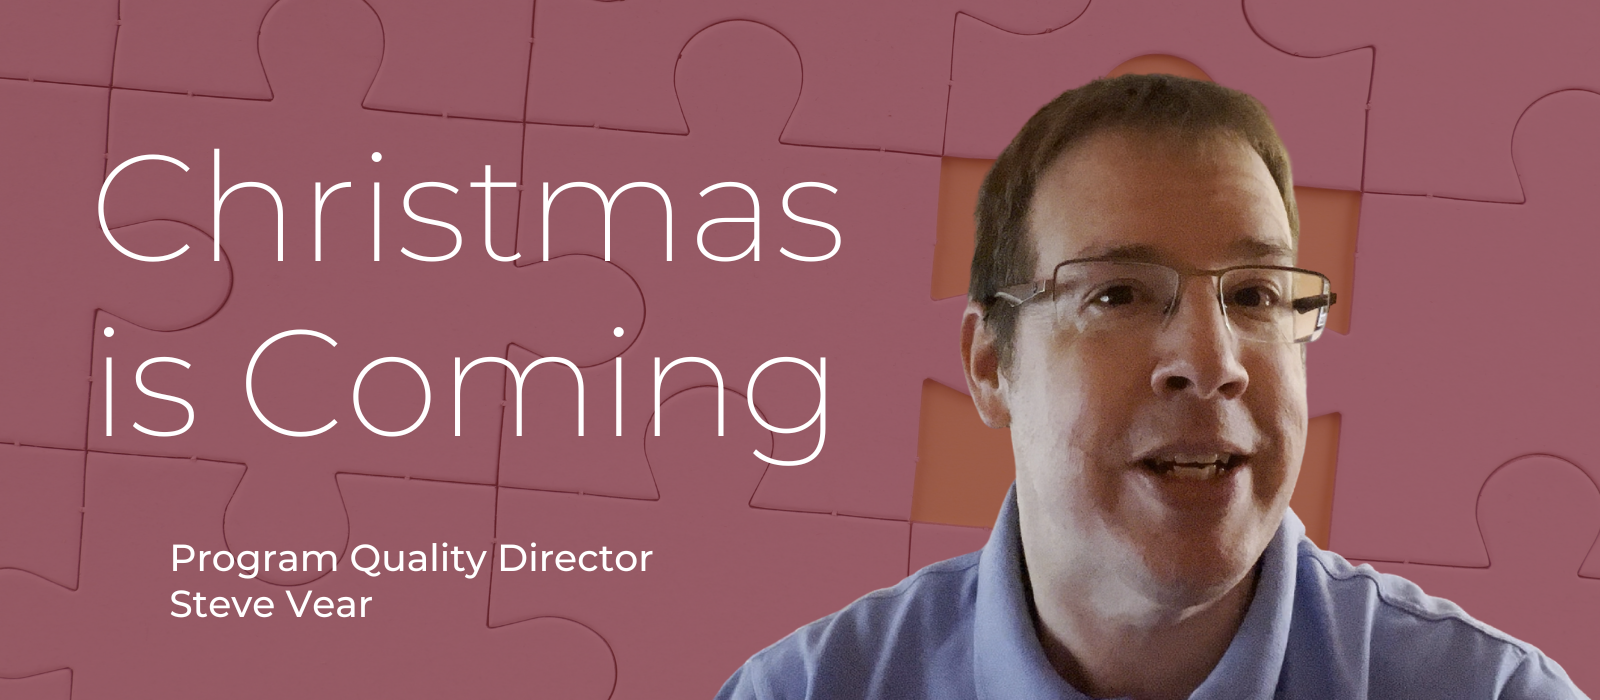 Christmas is Coming - Steve Vear